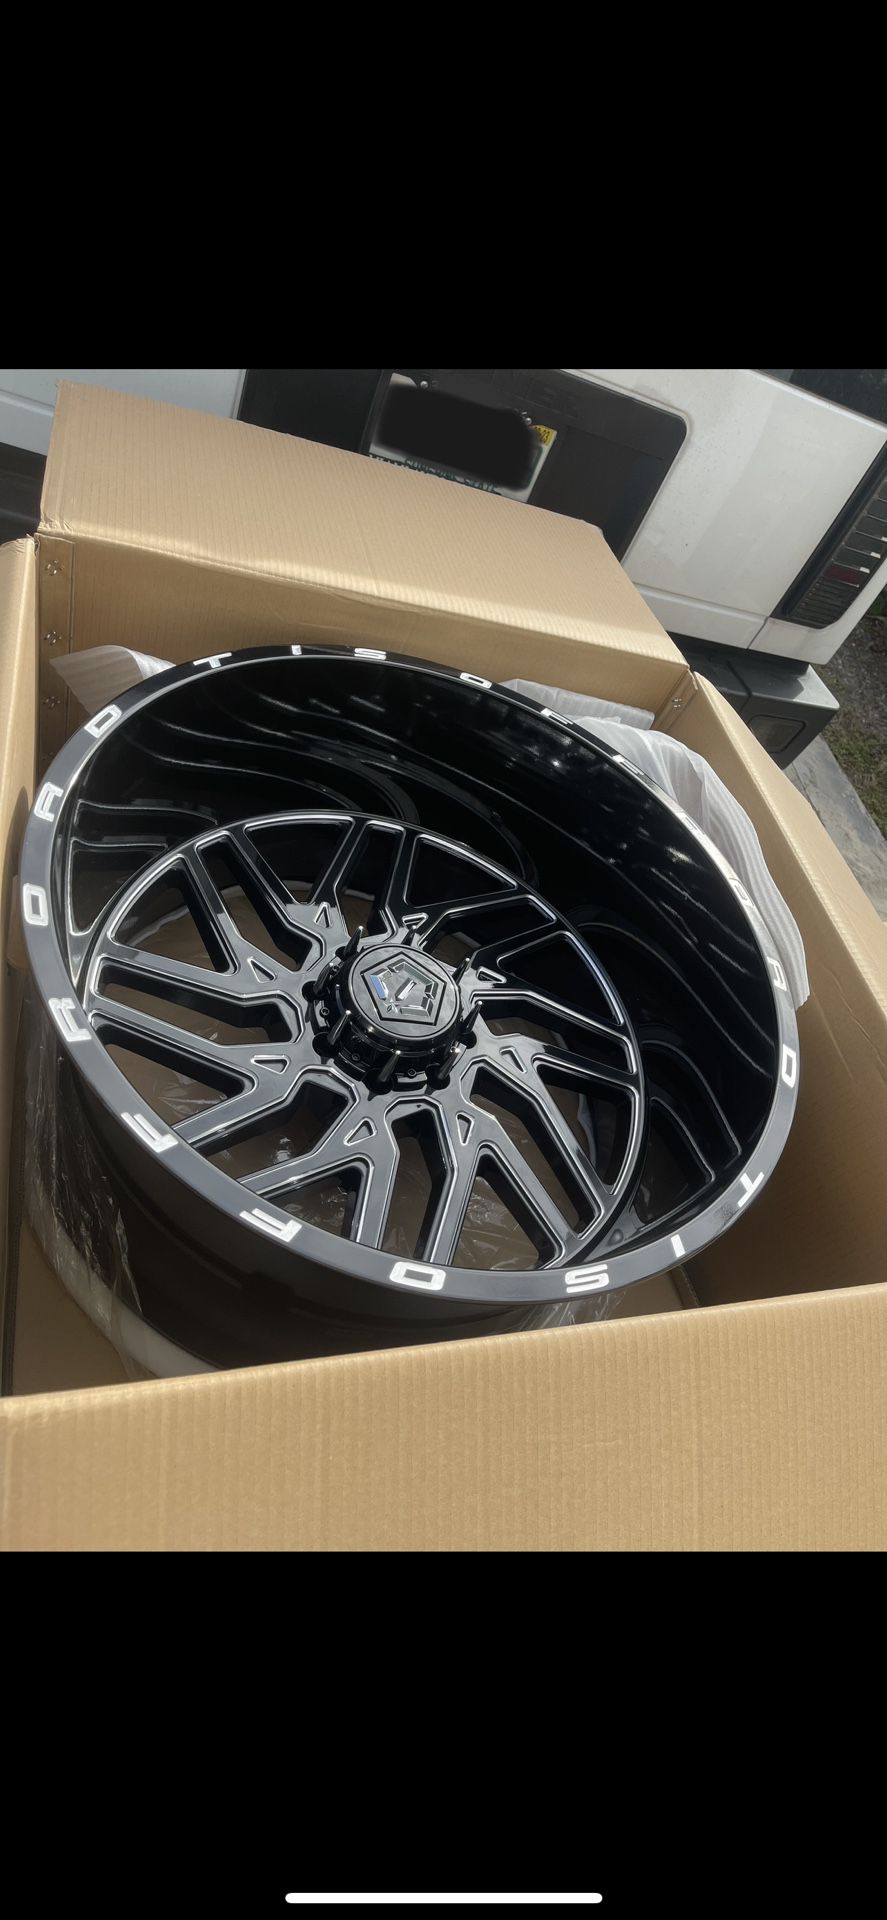 5 - BRAND NEW 26” TIS 544 8x6.5 With 37x13.5R26